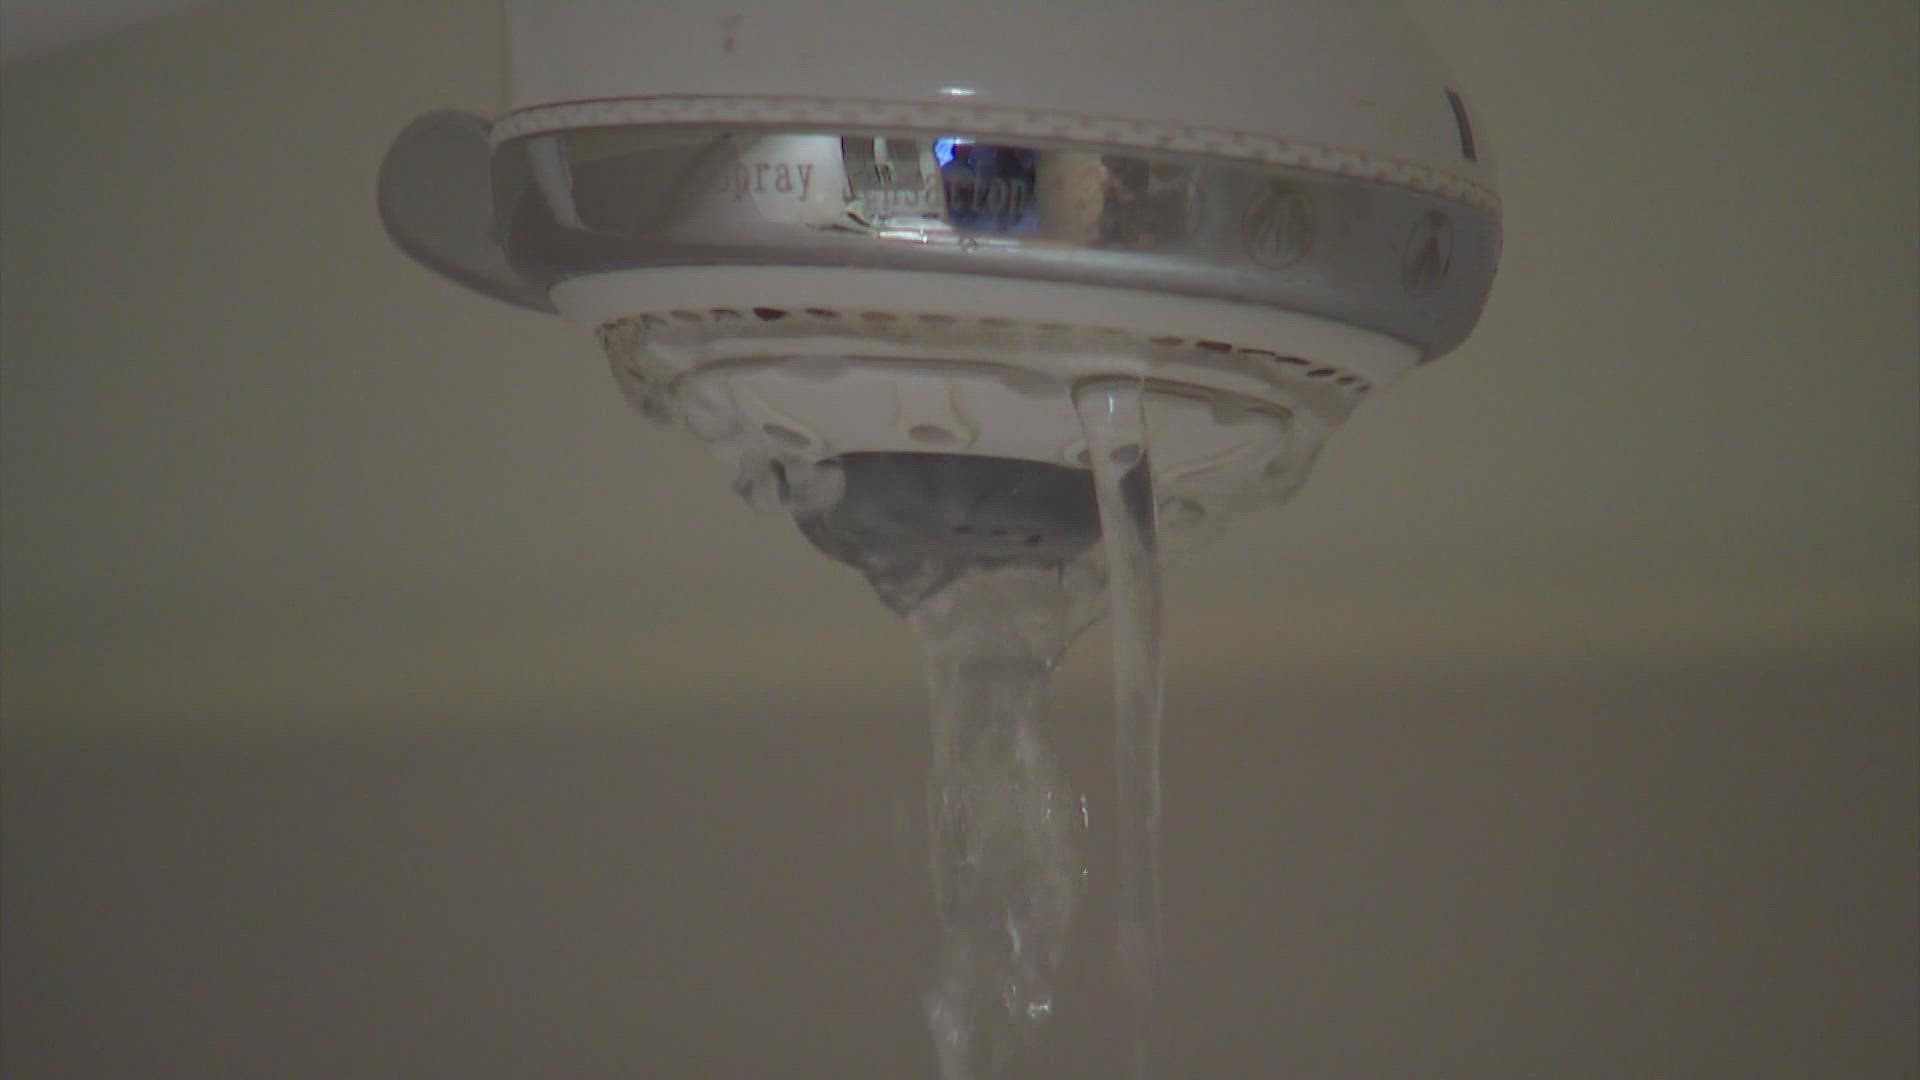 Since mid-July, tenants on the 6th floor say they have been dealing with low water pressure or no water at all.